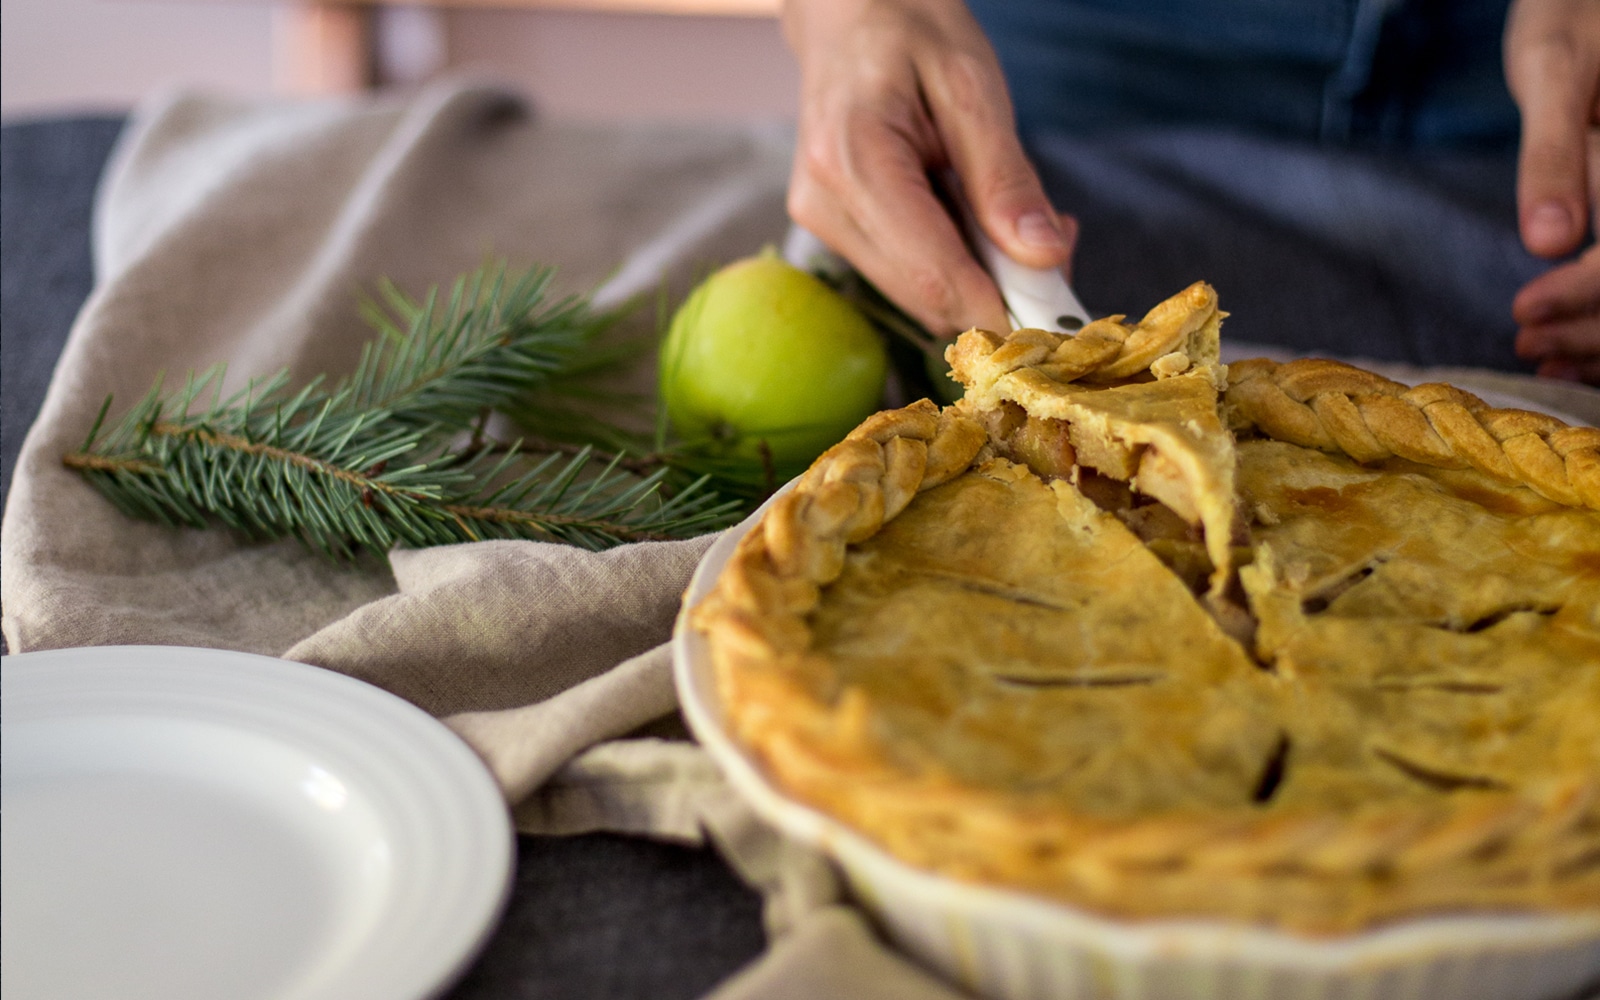 A Drunken Apple Pie Recipe. Adding in some bourbon and pears and this simple pie became something extra special. Recipe on the Fresh Exchange.